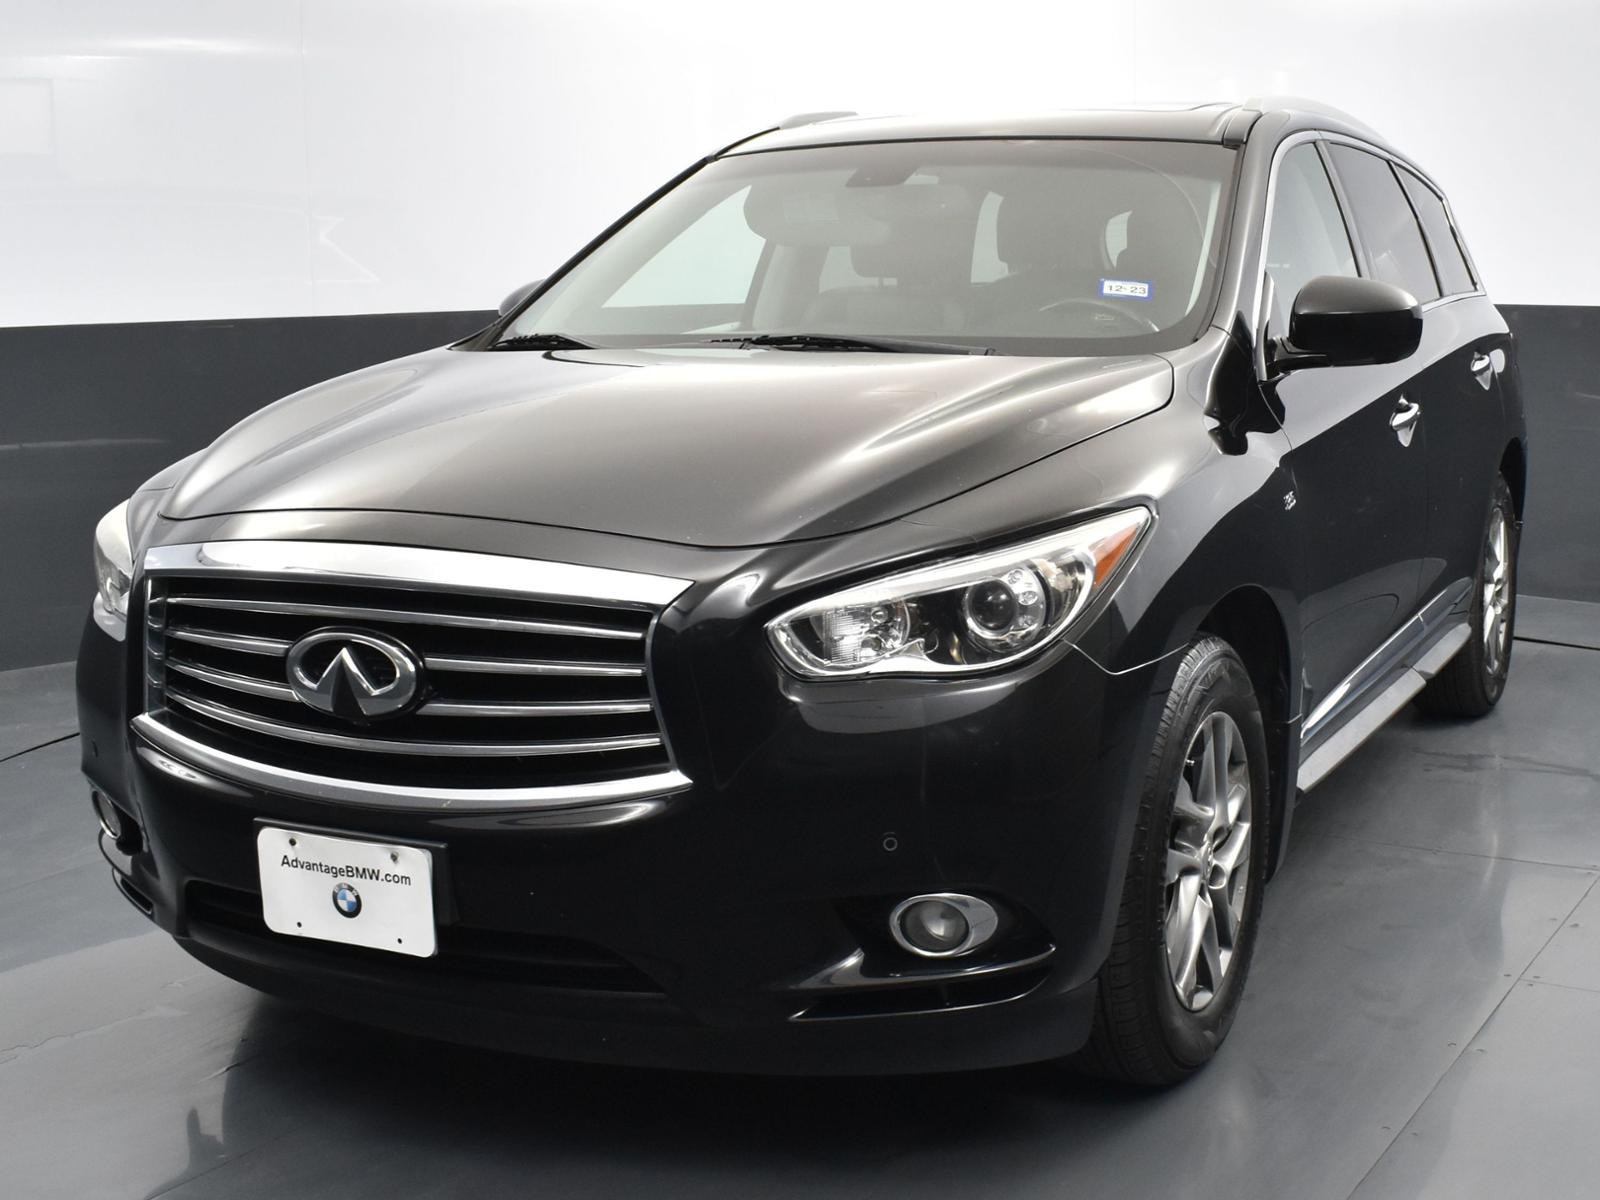 Pre-Owned 2015 INFINITI QX60 AWD 4dr Sport Utility in Houston #FC500066 |  Sterling McCall Hyundai